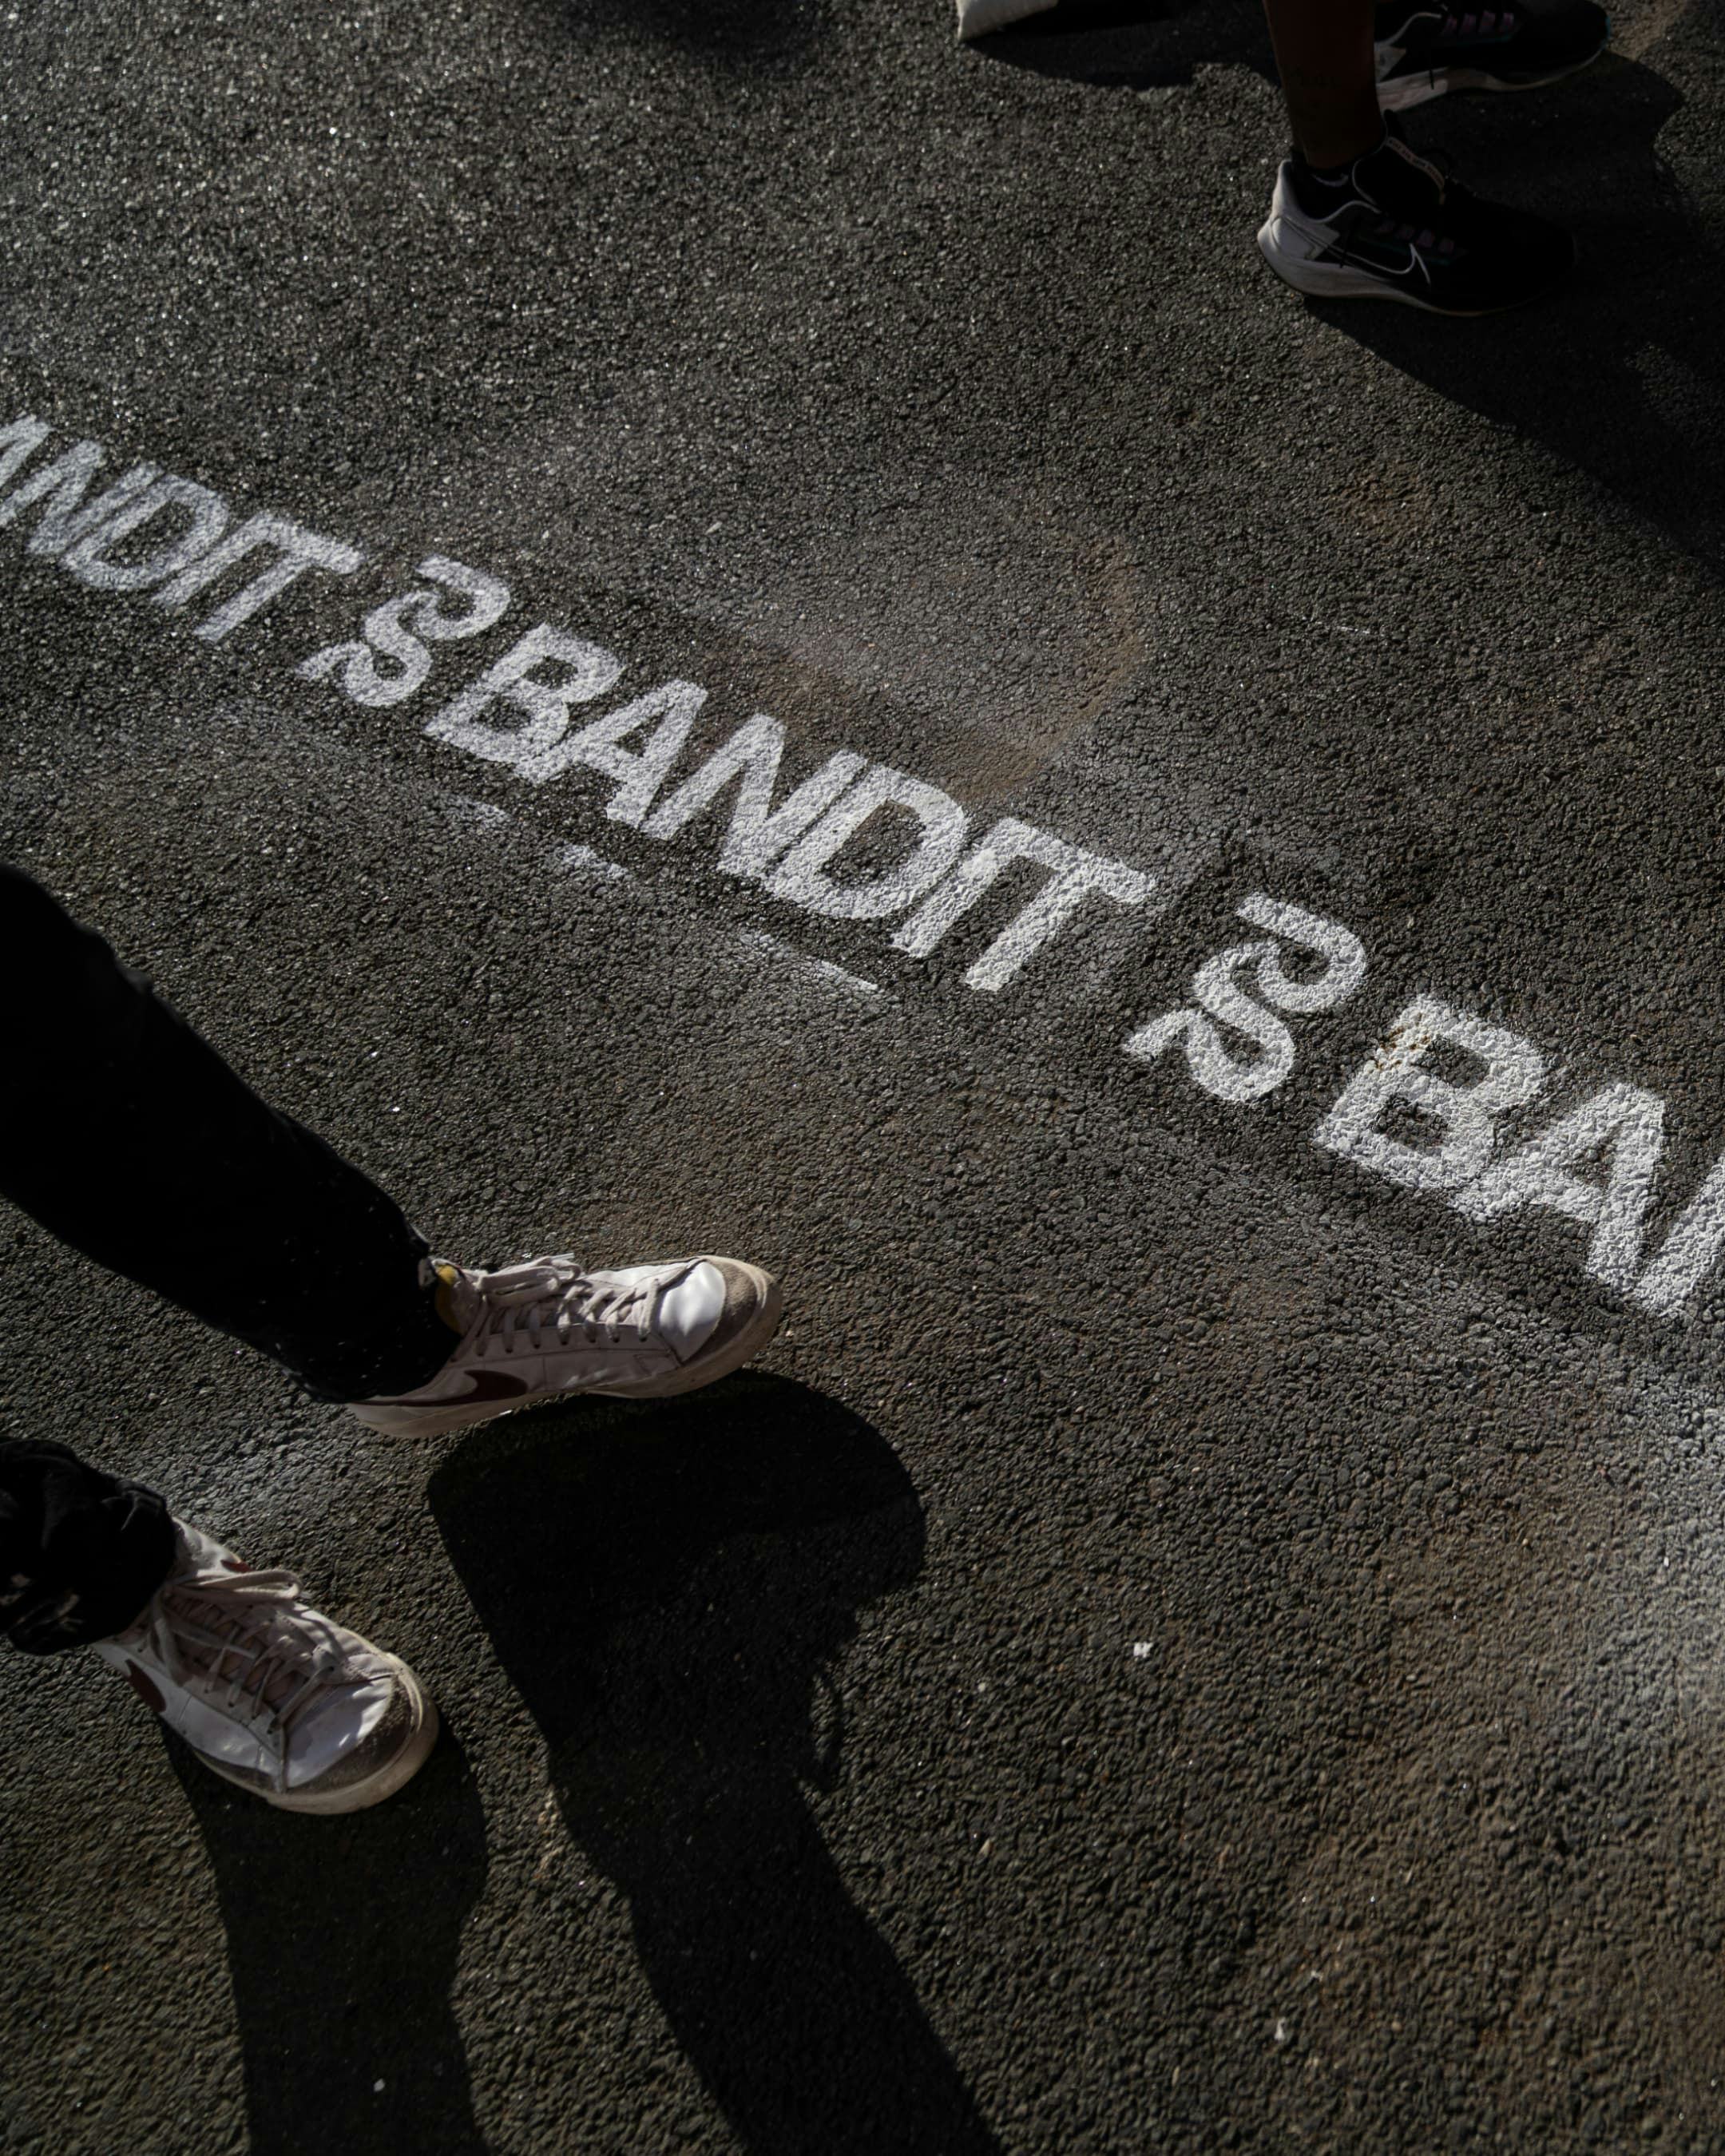 Bandit Running brand identity by View Source.